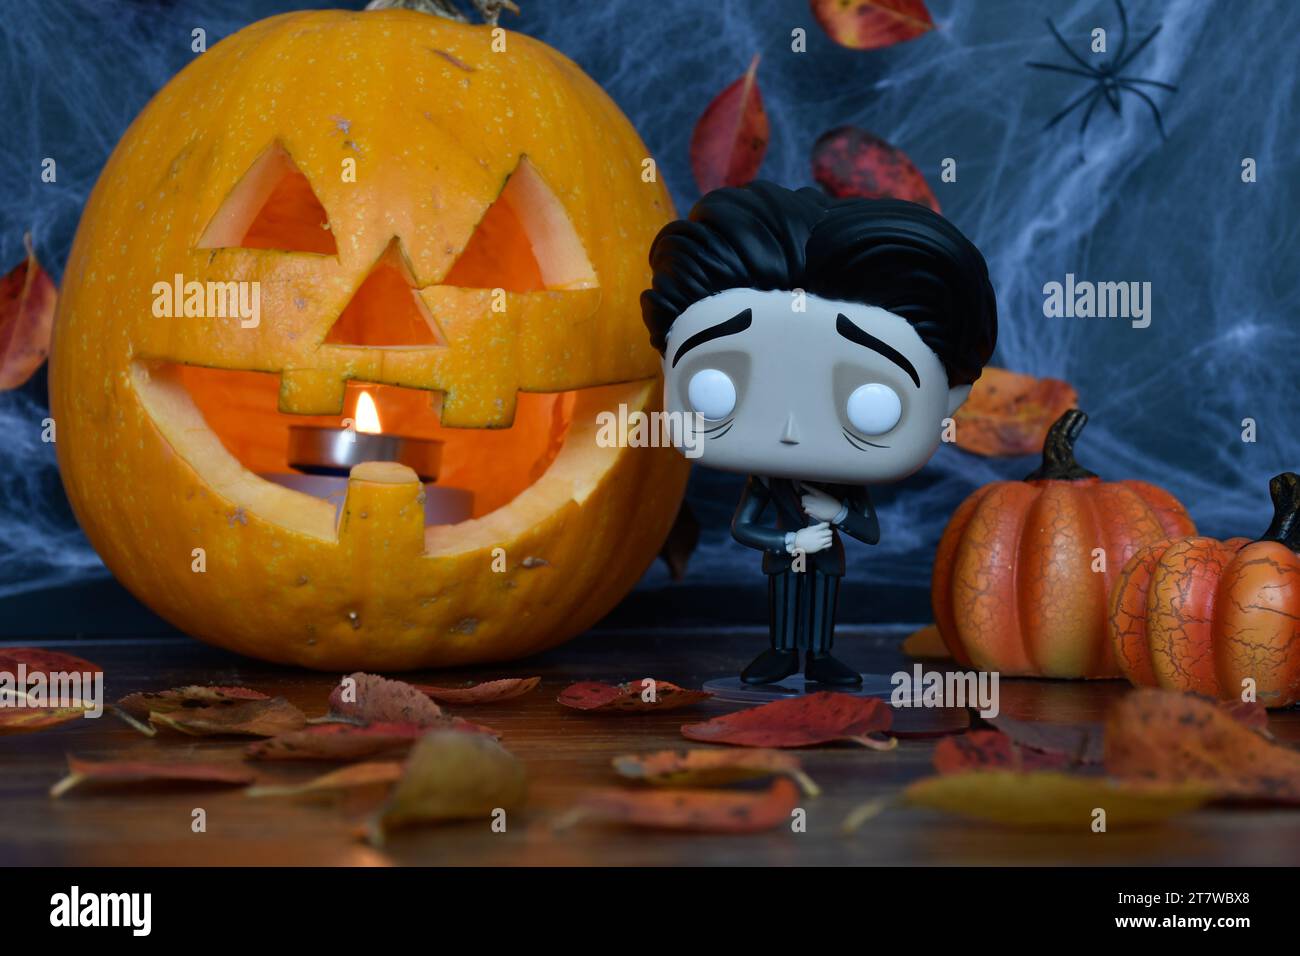 Funko Pop action figure of Victor from dark fantasy gothic animated film Corpse Bride.  Halloween, Jack o lantern, spider web, autumn leaves, spooky. Stock Photo